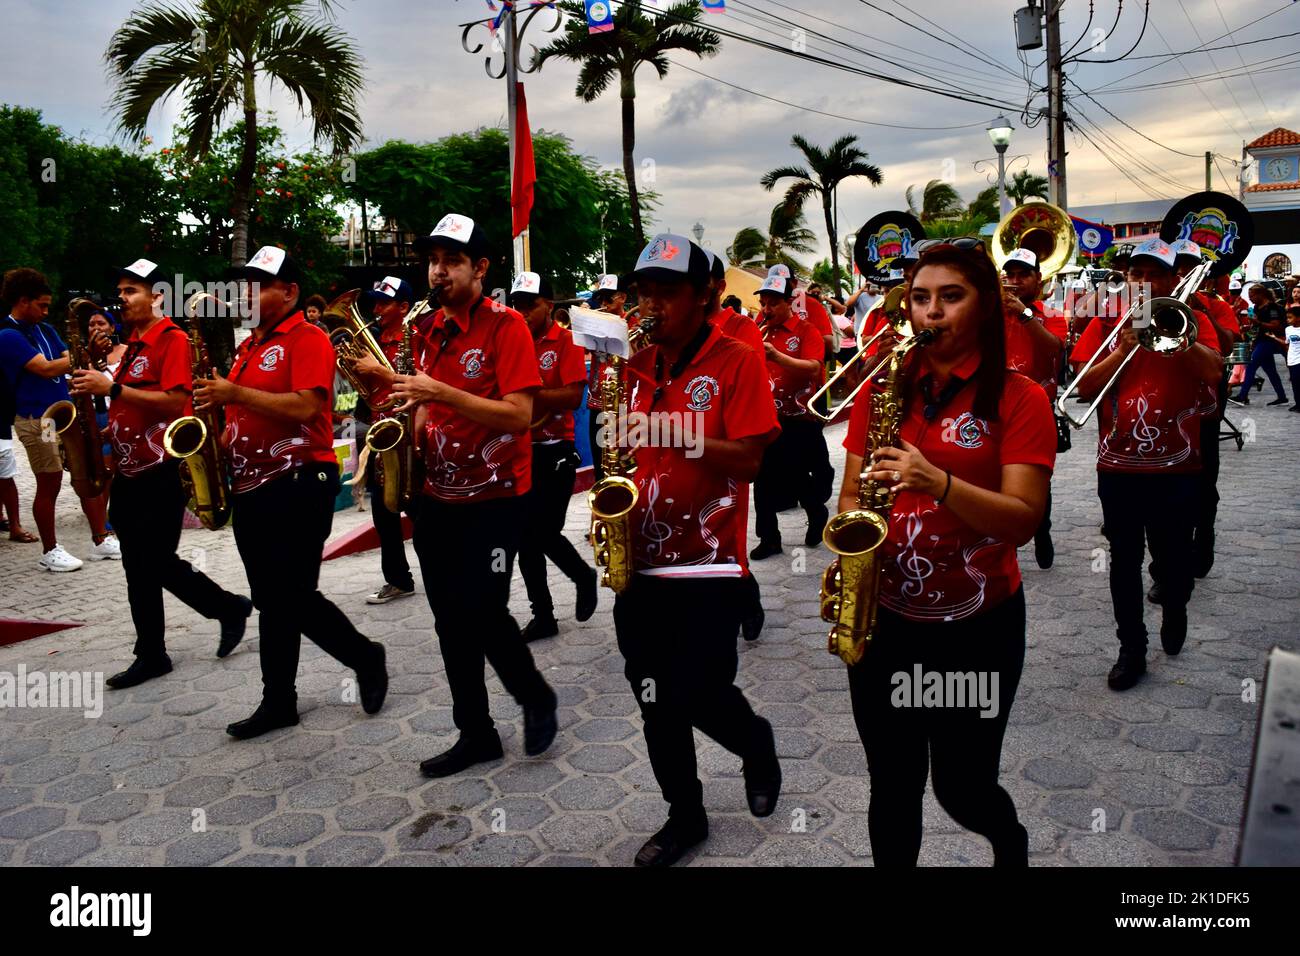 The Guayabal Latin Band Municipal, from El Salvador, marching down the streets of San Pedro, Belize performing for Noche Centroamericana. Stock Photo